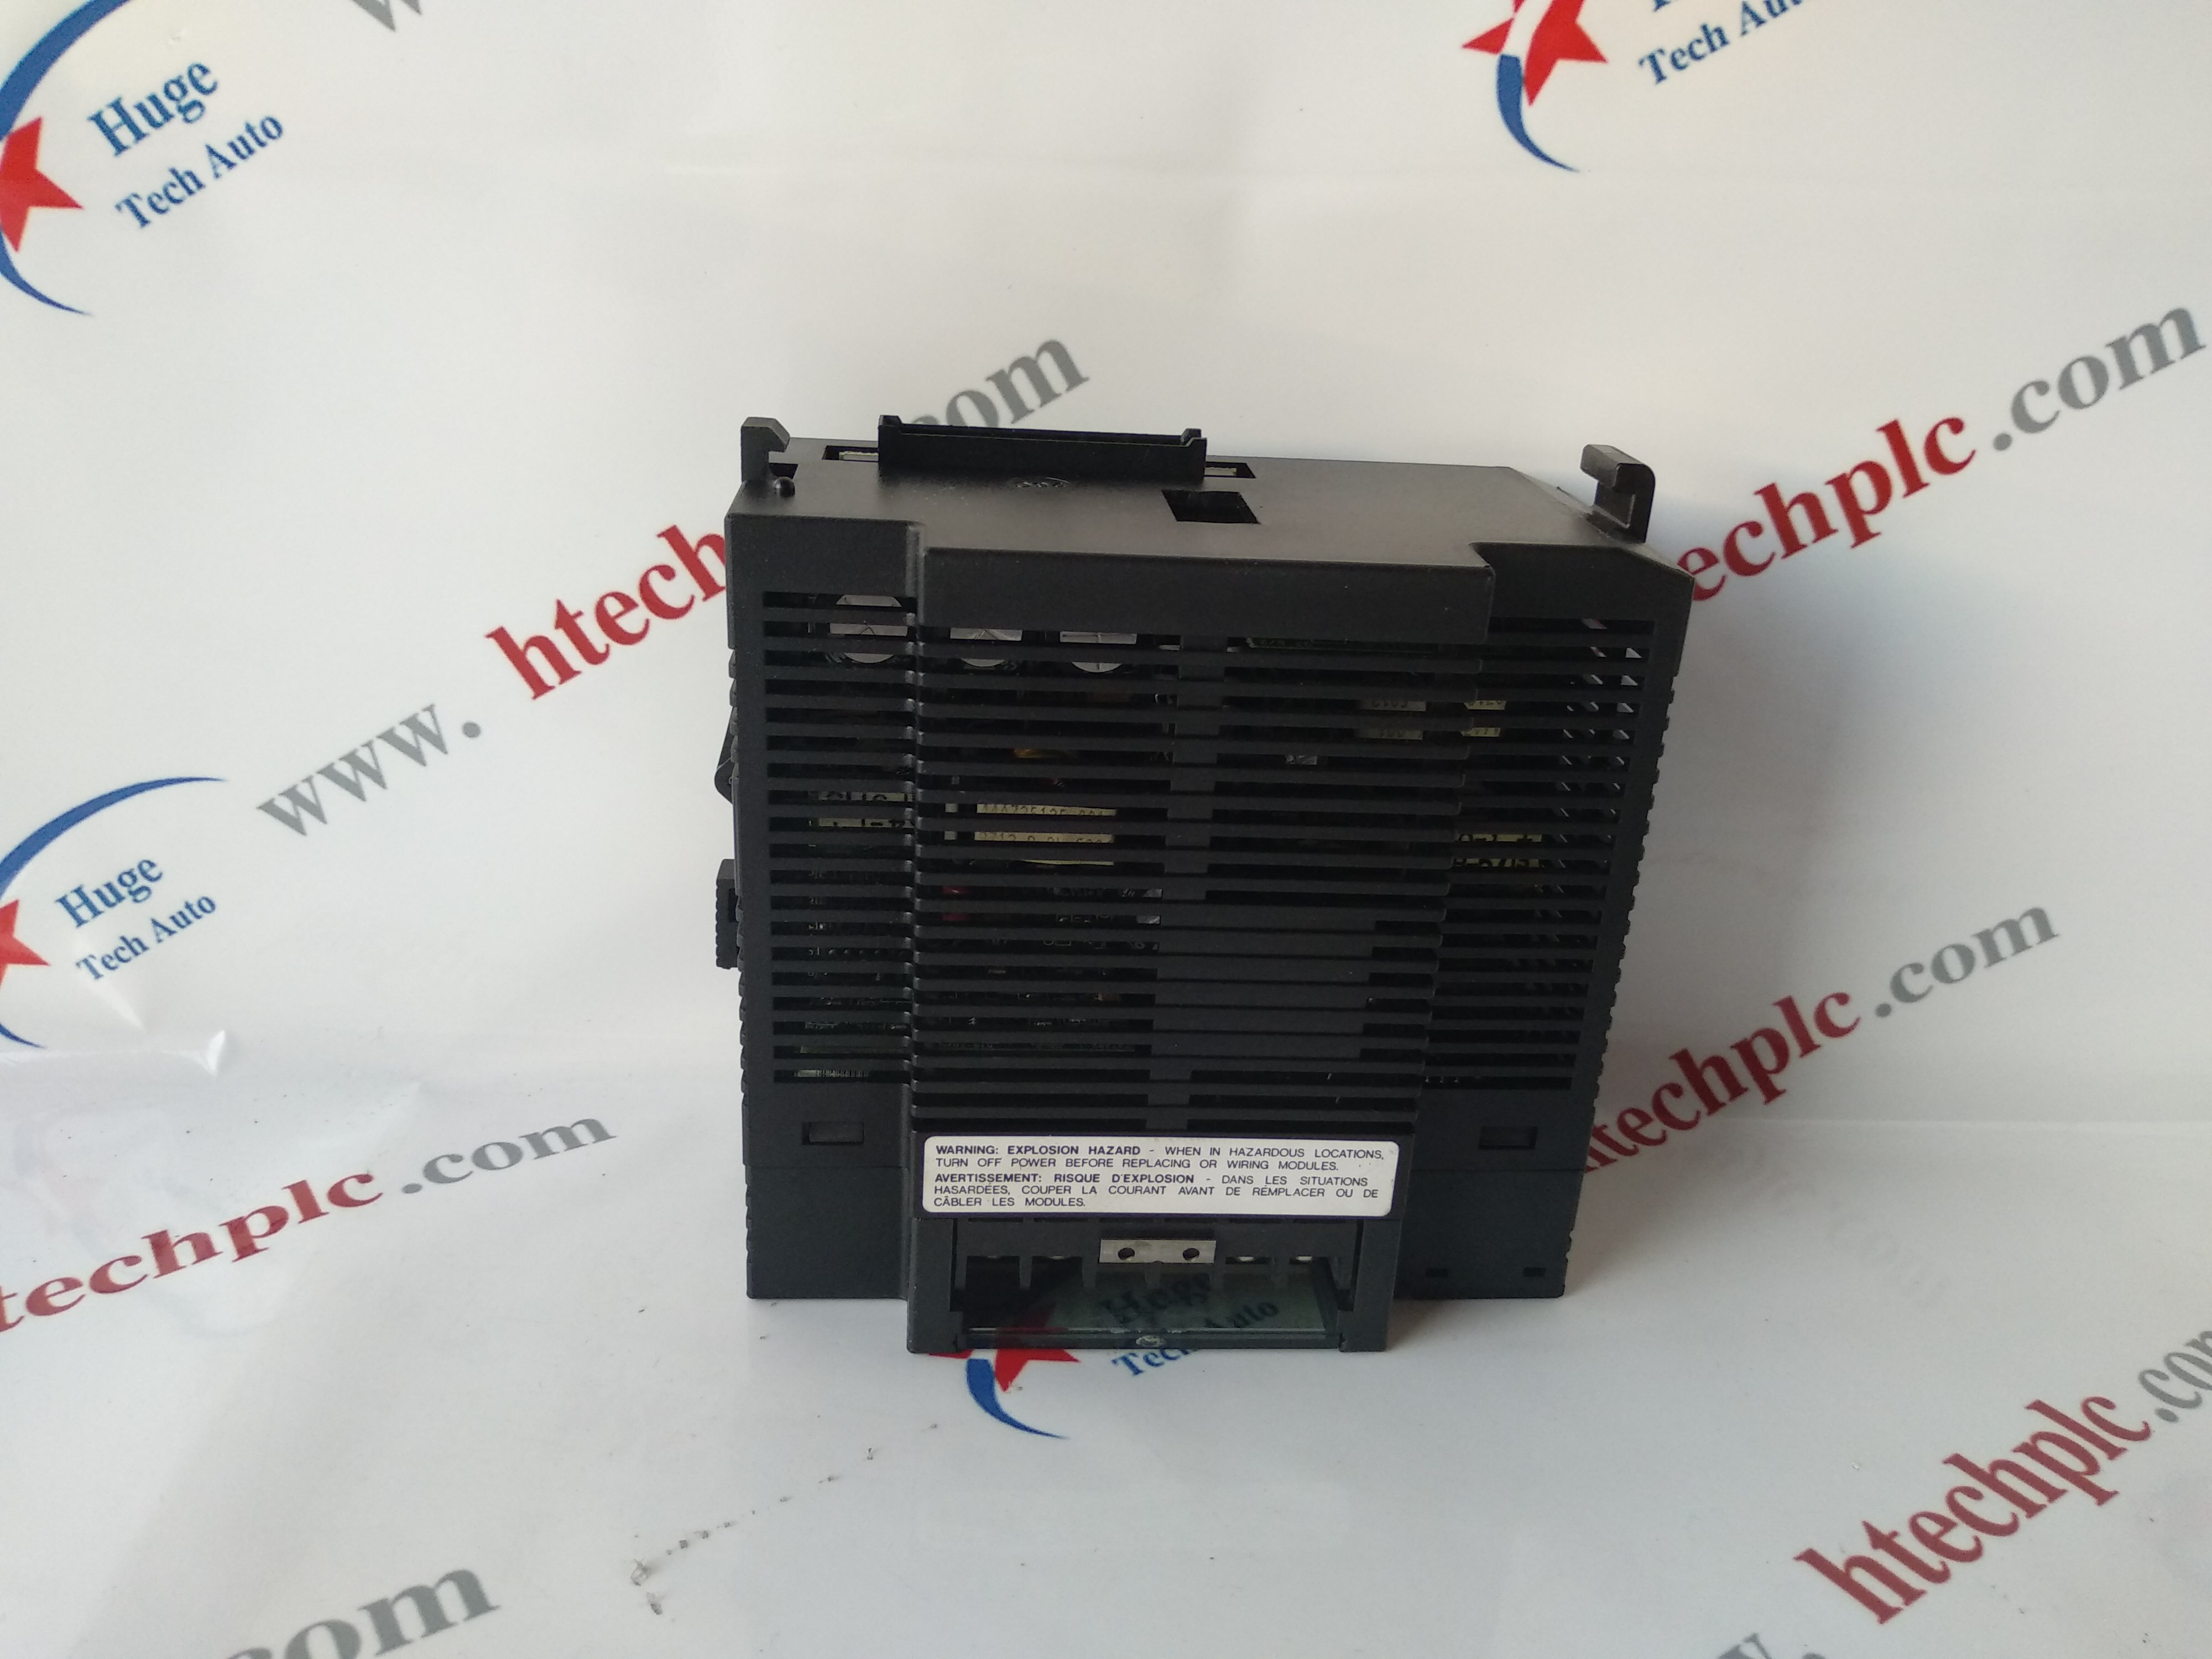 GE 531X112PSAAHG1 brand new PLC DCS TSI system spare parts in stock